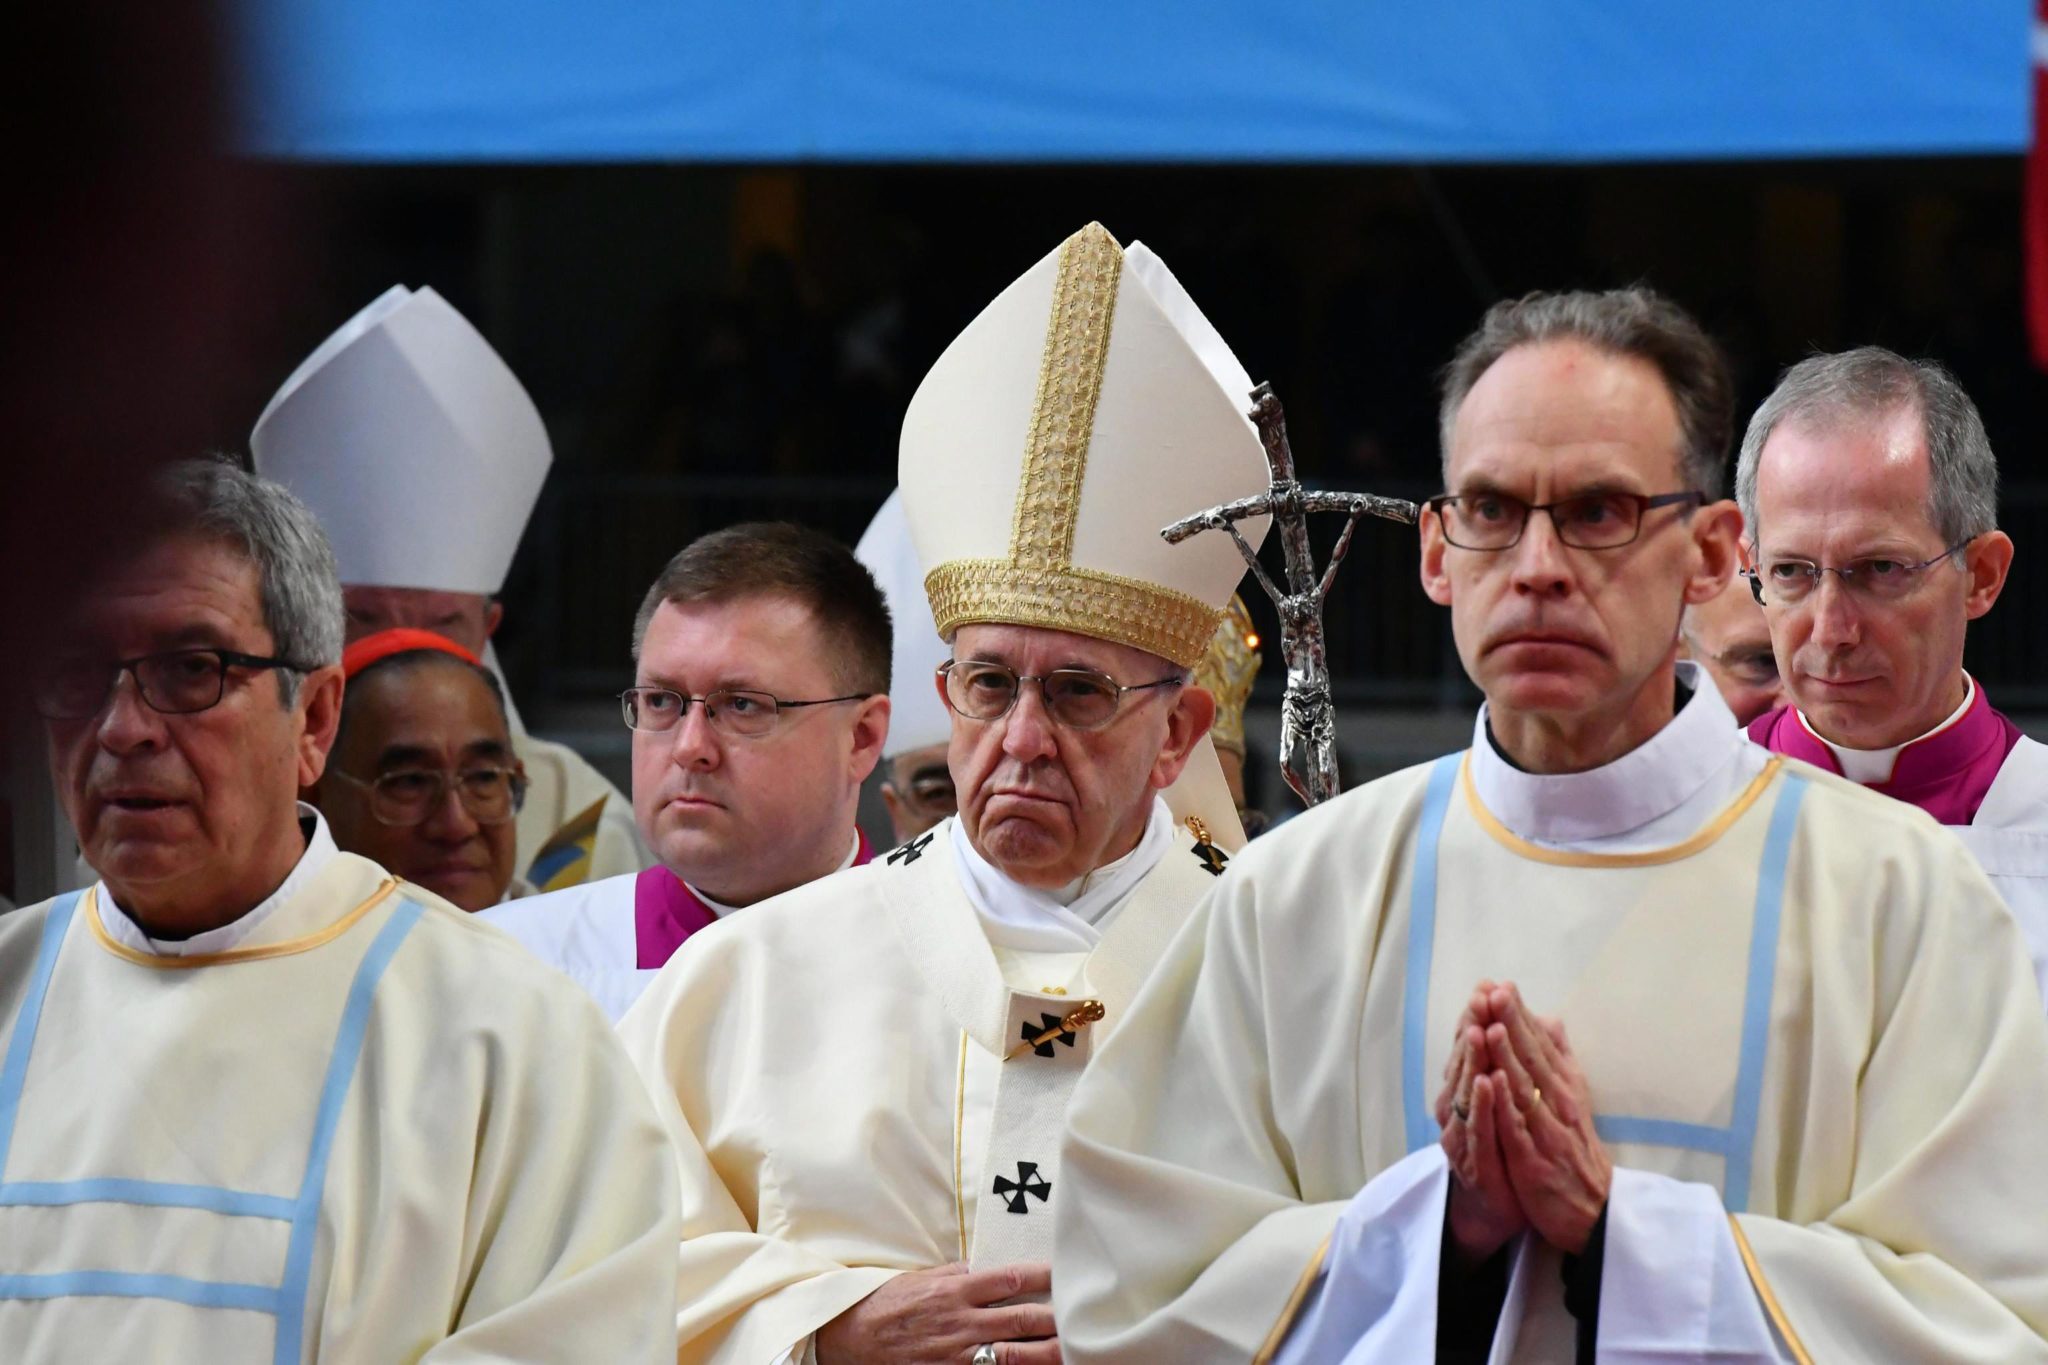 epa05612415 Pope Francis (C) prepares to celebrate mass at the Swedenbank Stadion in Malmo, Sweden, 01 November 2016.
Pope Francis is visiting Malmo and Lund to participate in an ecumenical service and the beginning of a year of activities to mark the joint Lutheran-Catholic commemoration of the 500th anniversary of the Reformation.  EPA/VINCENZO PINTO / POOL 
Dostawca: PAP/EPA.